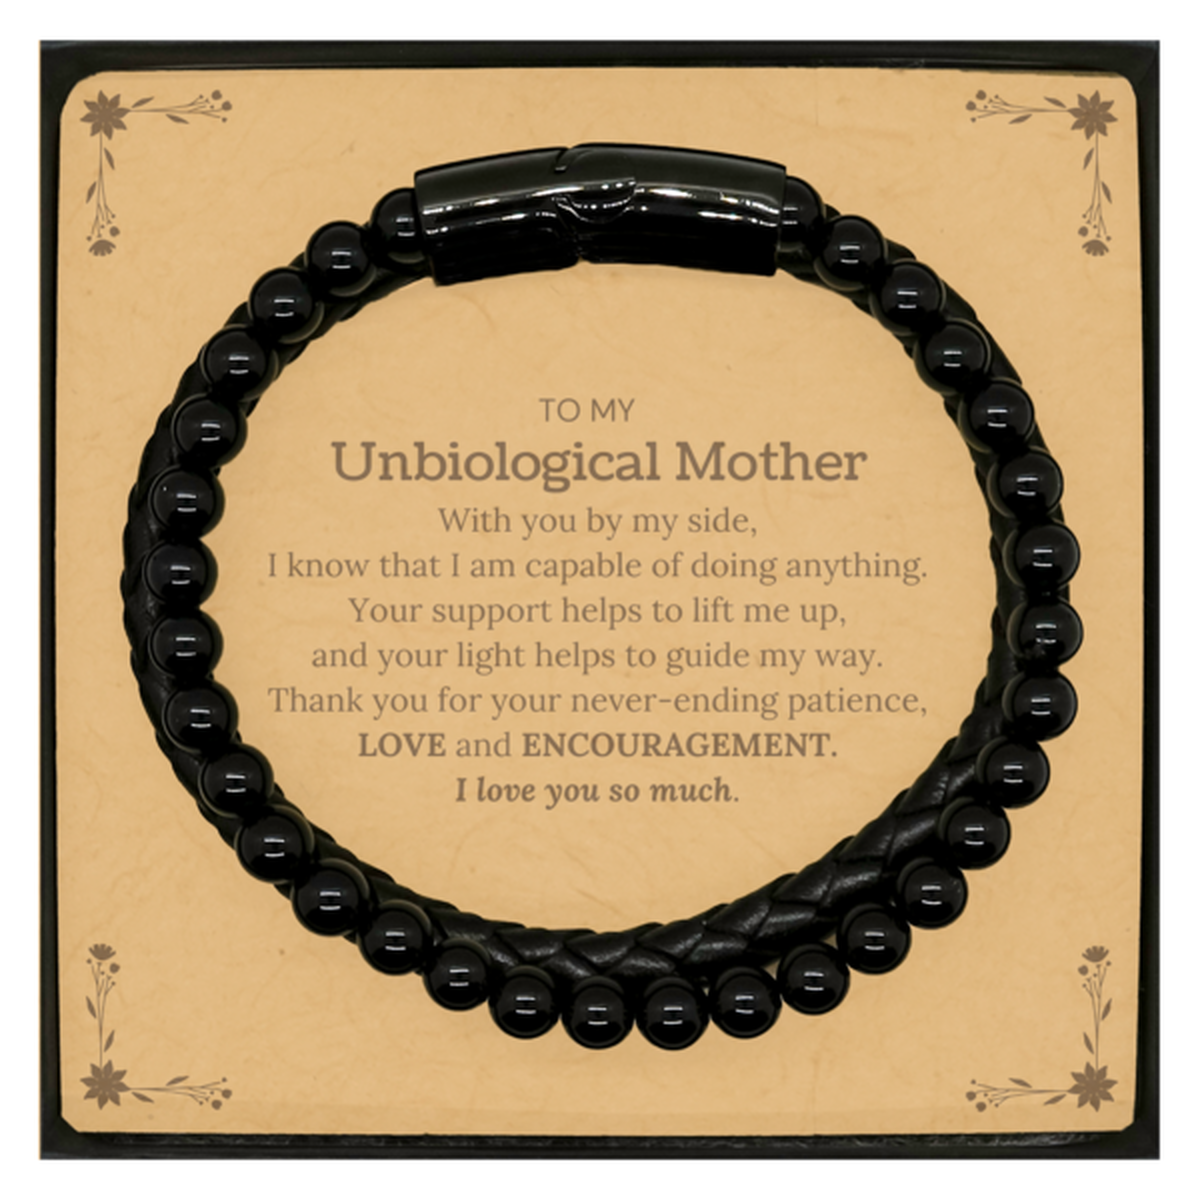 Appreciation Unbiological Mother Stone Leather Bracelets Gifts, To My Unbiological Mother Birthday Christmas Wedding Keepsake Gifts for Unbiological Mother With you by my side, I know that I am capable of doing anything. I love you so much